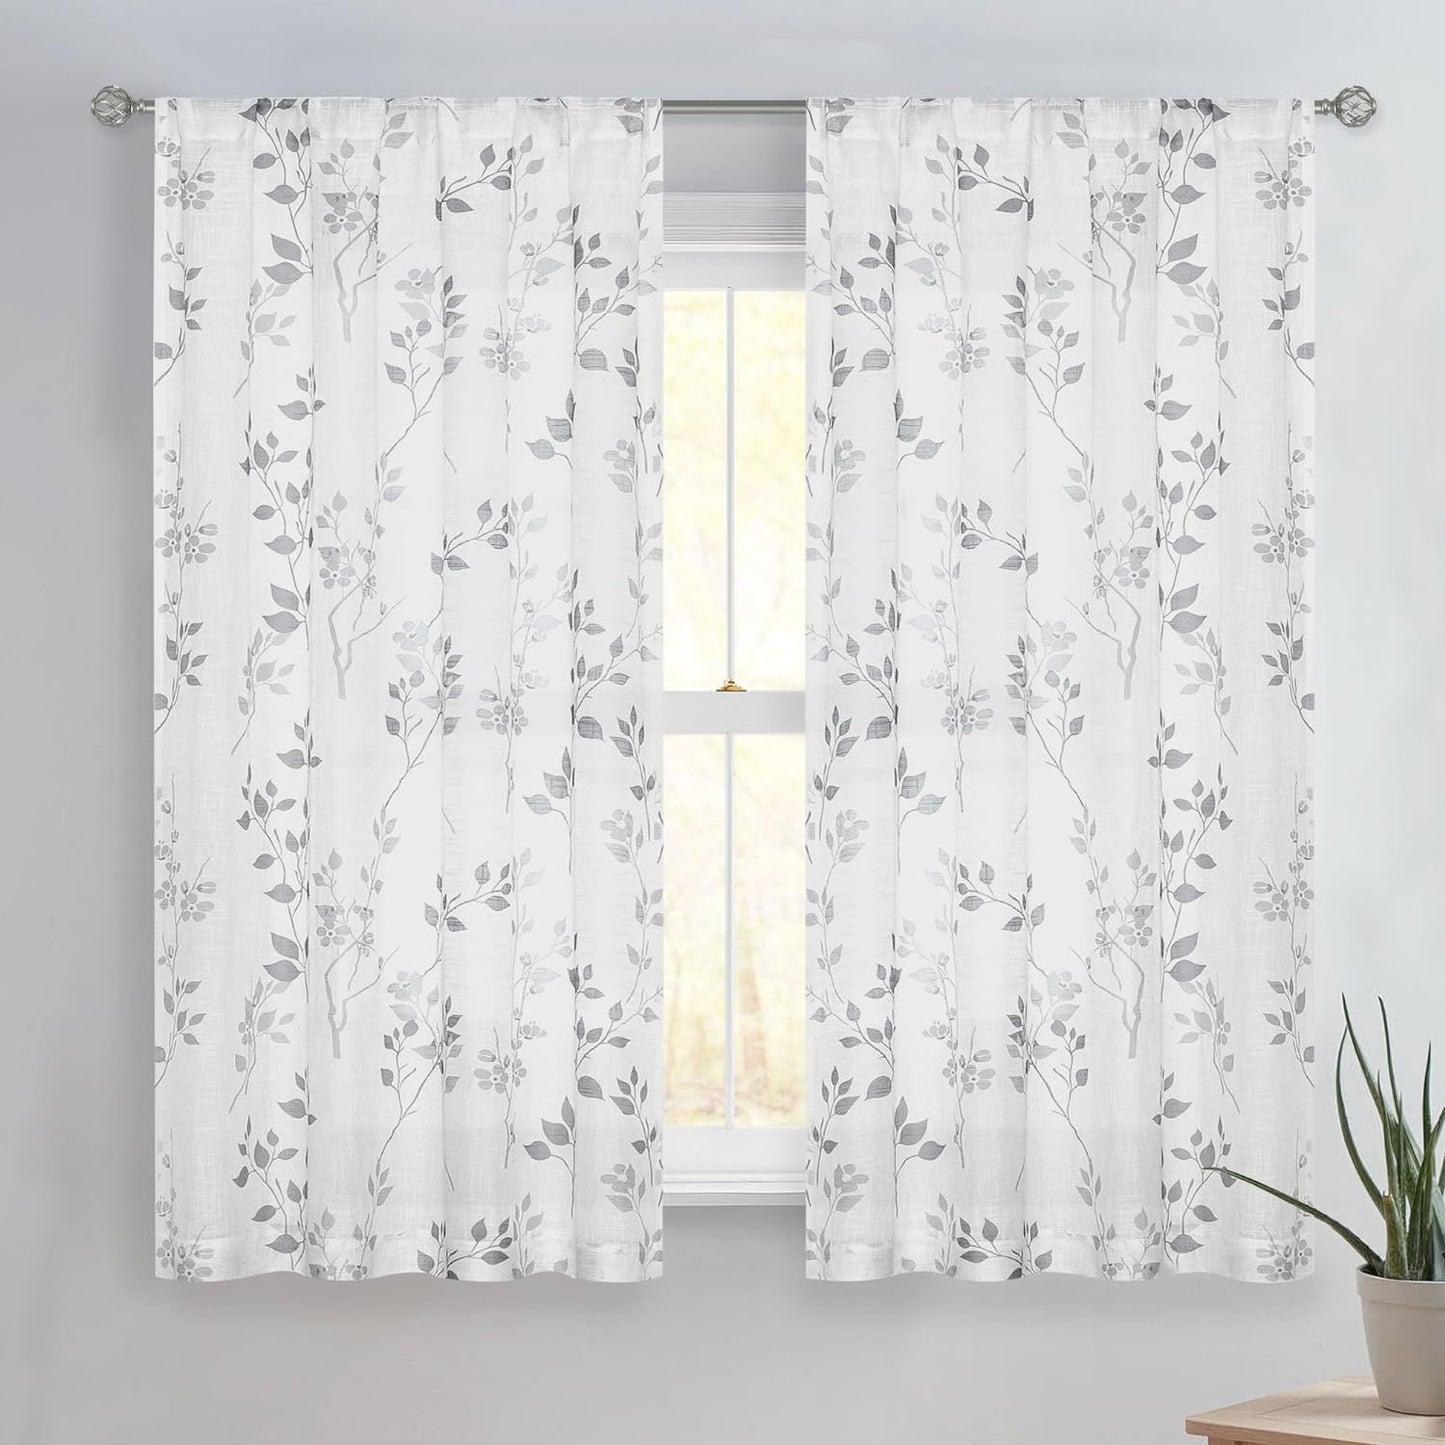 Beauoop Floral Semi Sheer Curtains 84 Inch Long for Living Room Bedroom Farmhouse Botanical Leaf Printed Rustic Linen Texture Panel Drapes Rod Pocket Window Treatment,2 Panels,50 Wide,Yellow/Gray  Beauoop Grey 50"X54"X2 